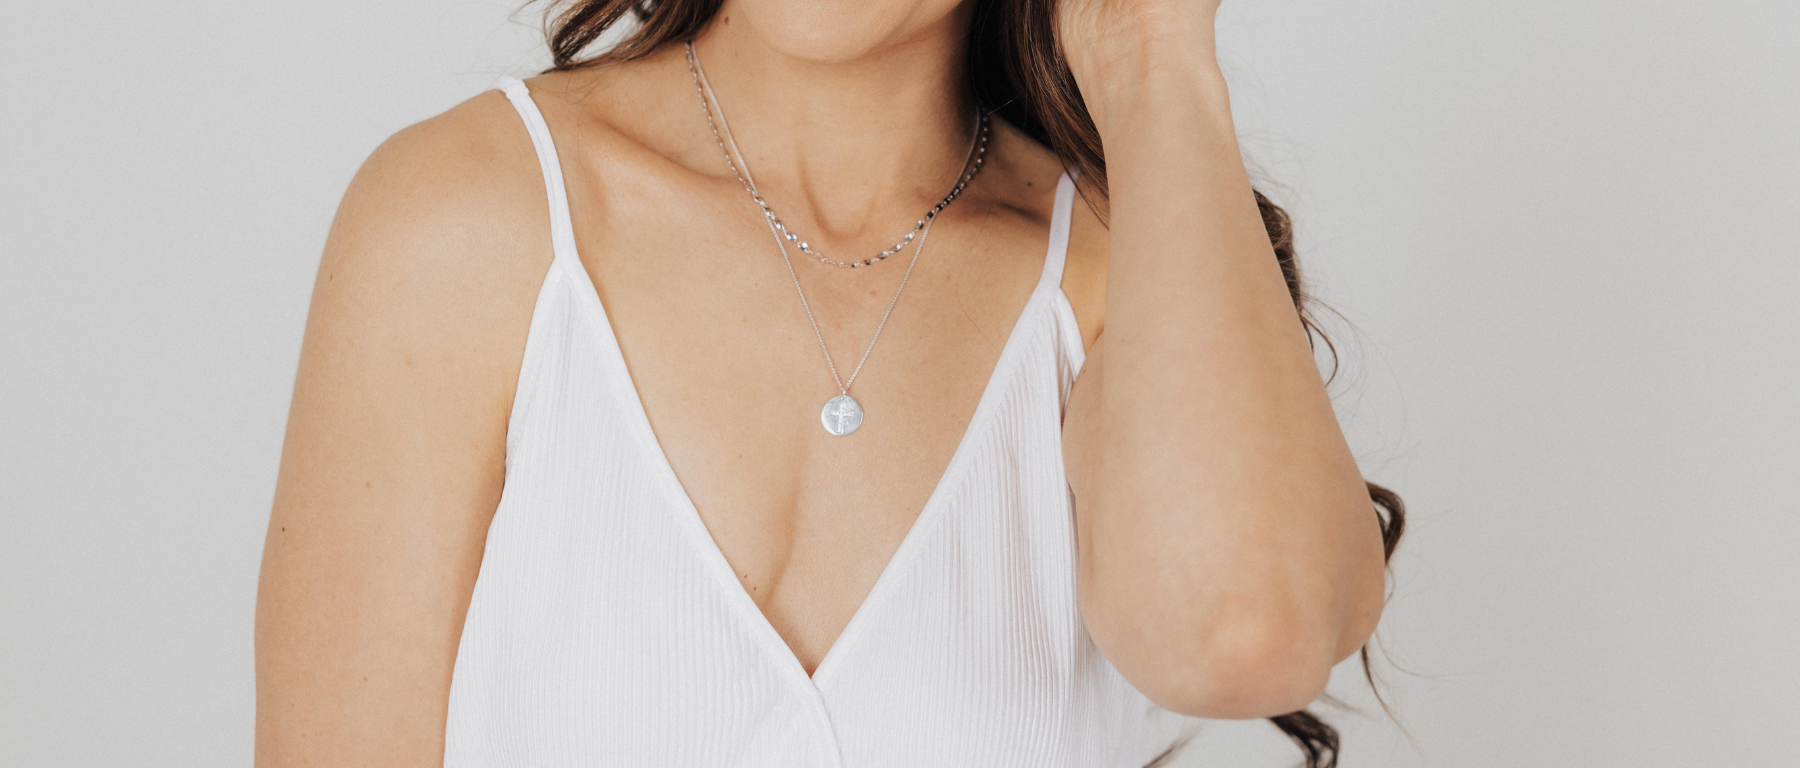 Top 4 Pendant Styles for Everyday Wear